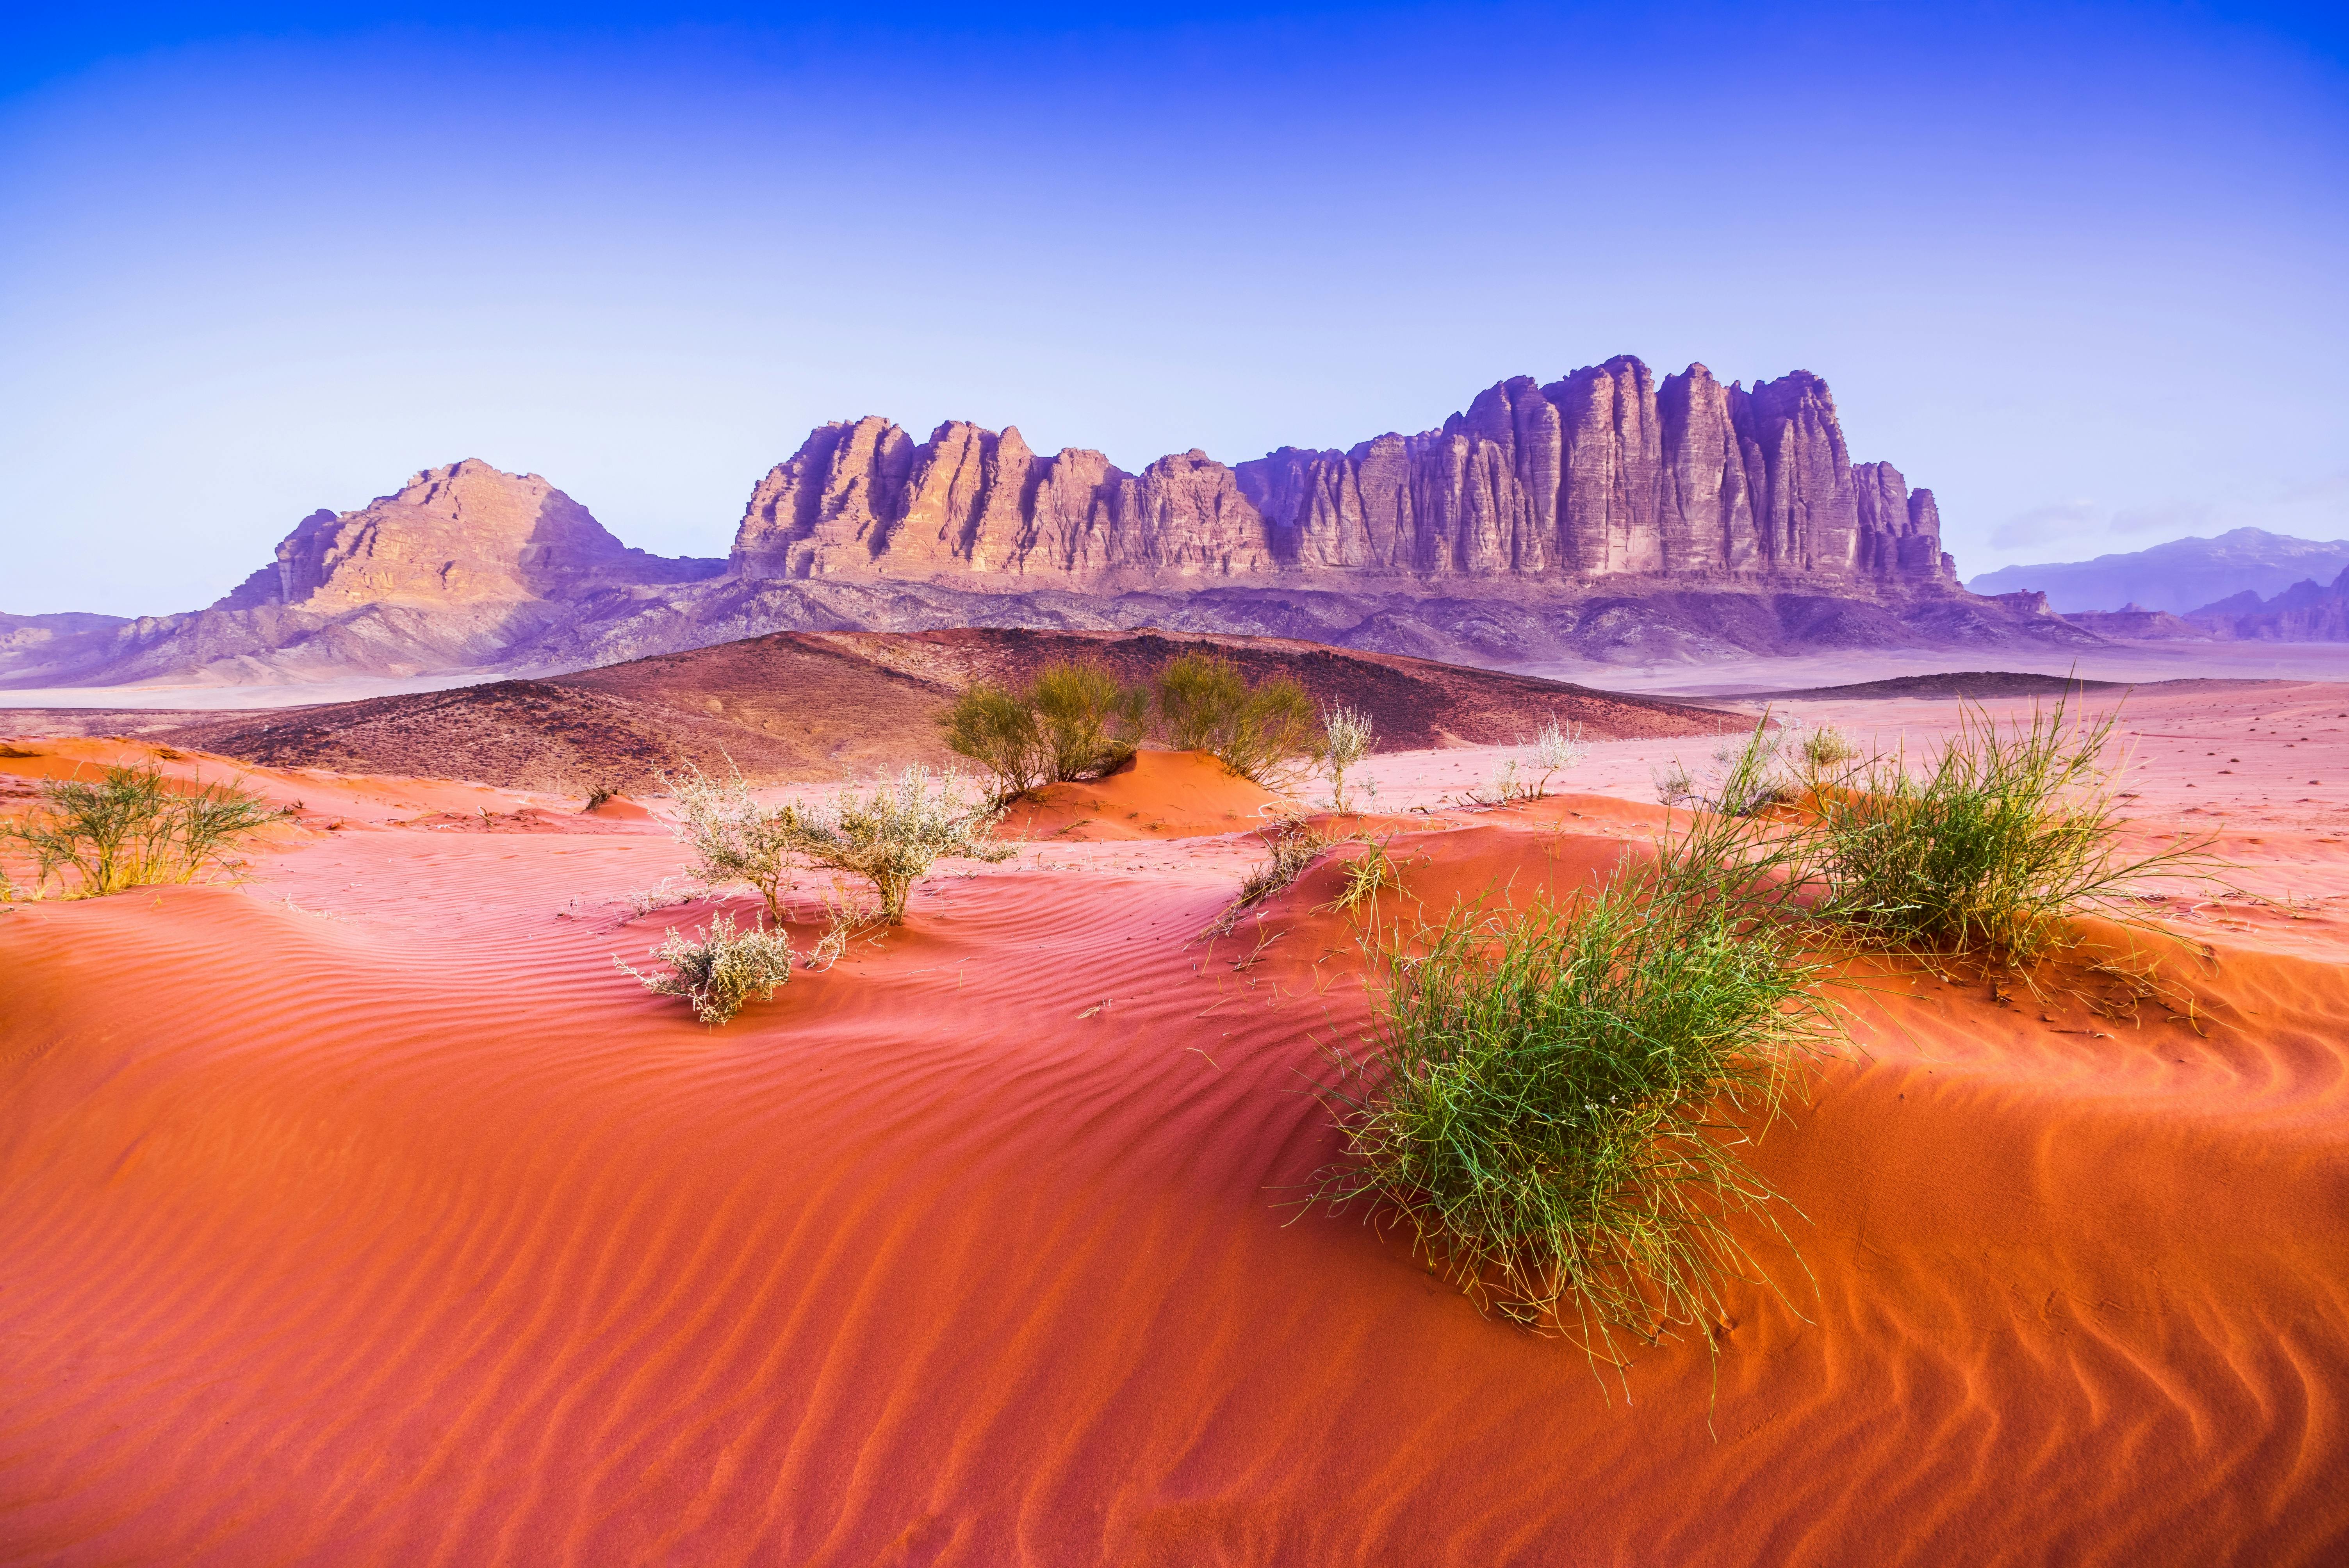 Private full-day trip to Wadi Rum Valley of Moon Martian Desert from Dead Sea